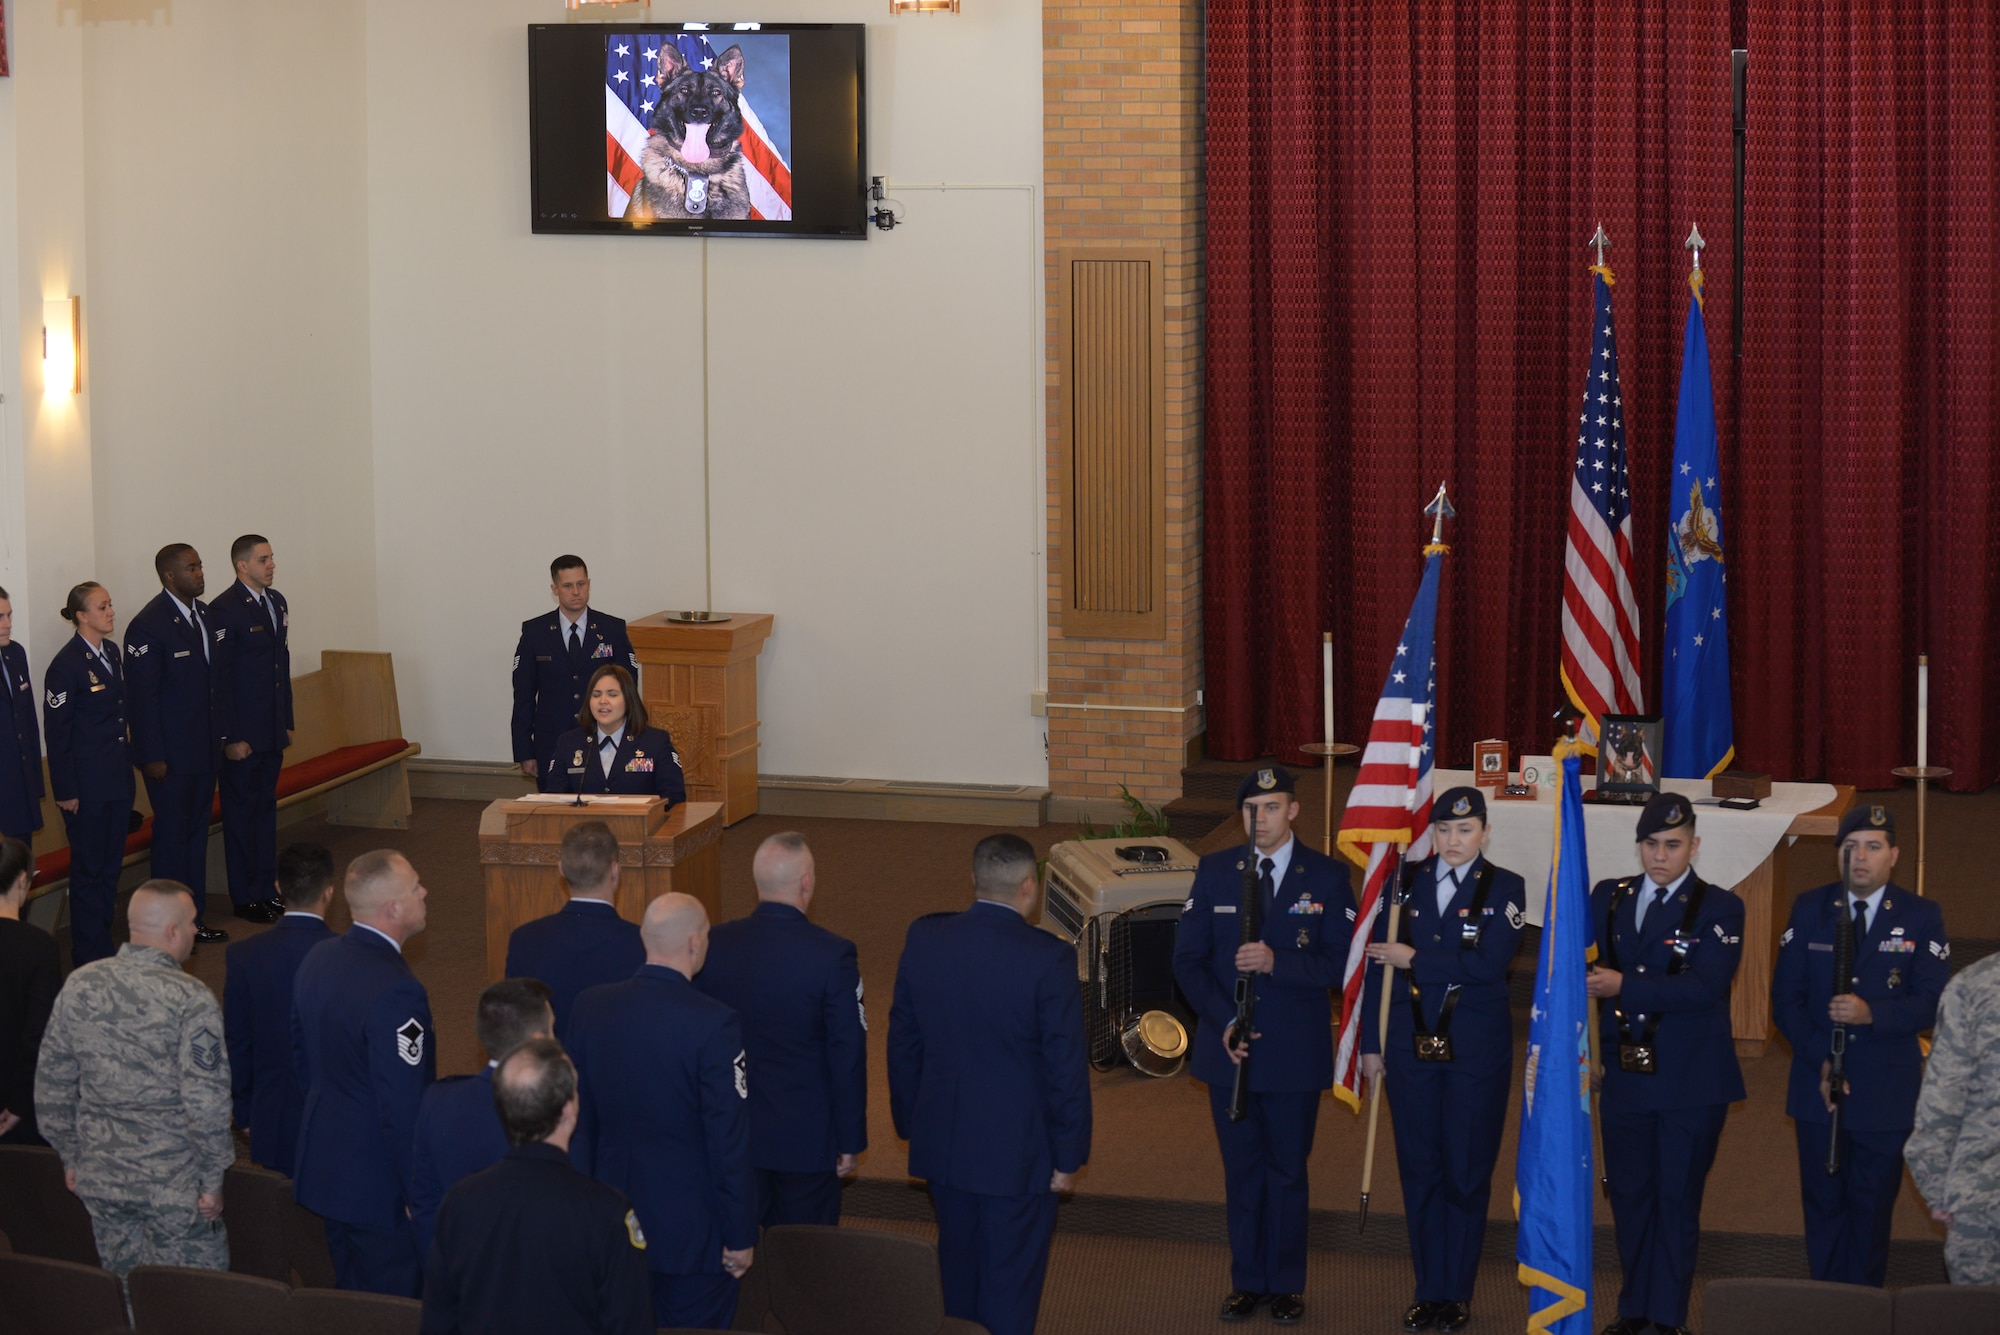 Airmen of the 28th Security Forces Squadron pay their respects to the fallen military working dog, Xarius, in the Freedom Chapel at Ellsworth Air Force Base, S.D., Nov. 4, 2016. When a military working dog falls in the line of duty the unit honors the fallen defender with a full retirement ceremony in memory of their service. (U.S. Air Force photo by Airman 1st Class Donald C. Knechtel)